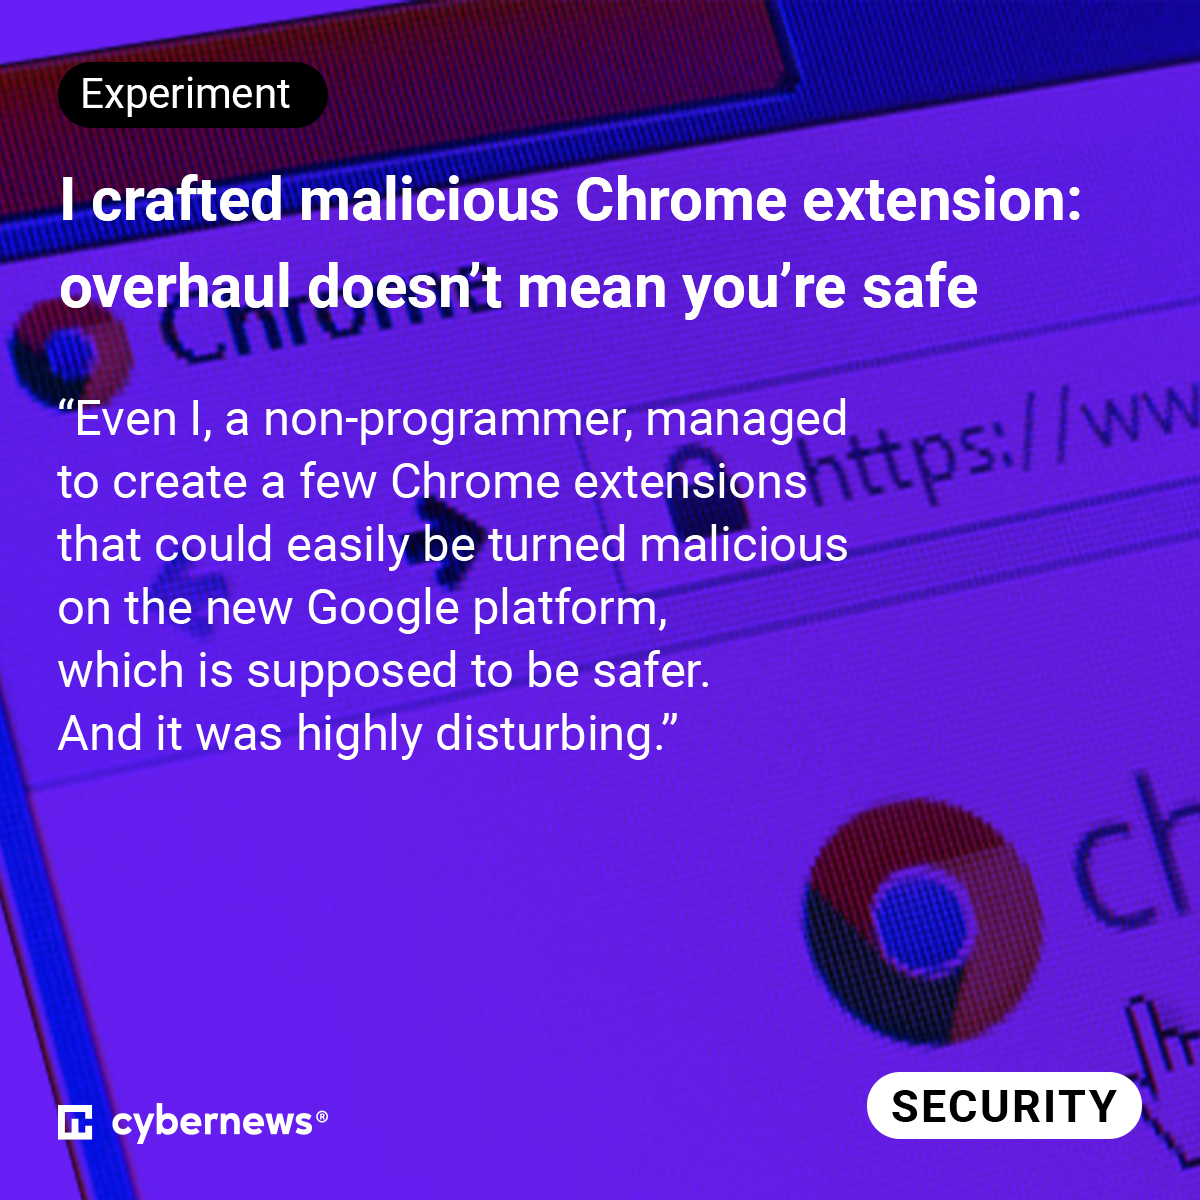 Experiment: I crafted a malicious Chrome extension: overhaul doesn’t mean you’re safe
Read more: cnews.link/malicious-chro… 
#cybersecurity #GoogleChrome #onlinesecurity #privacy